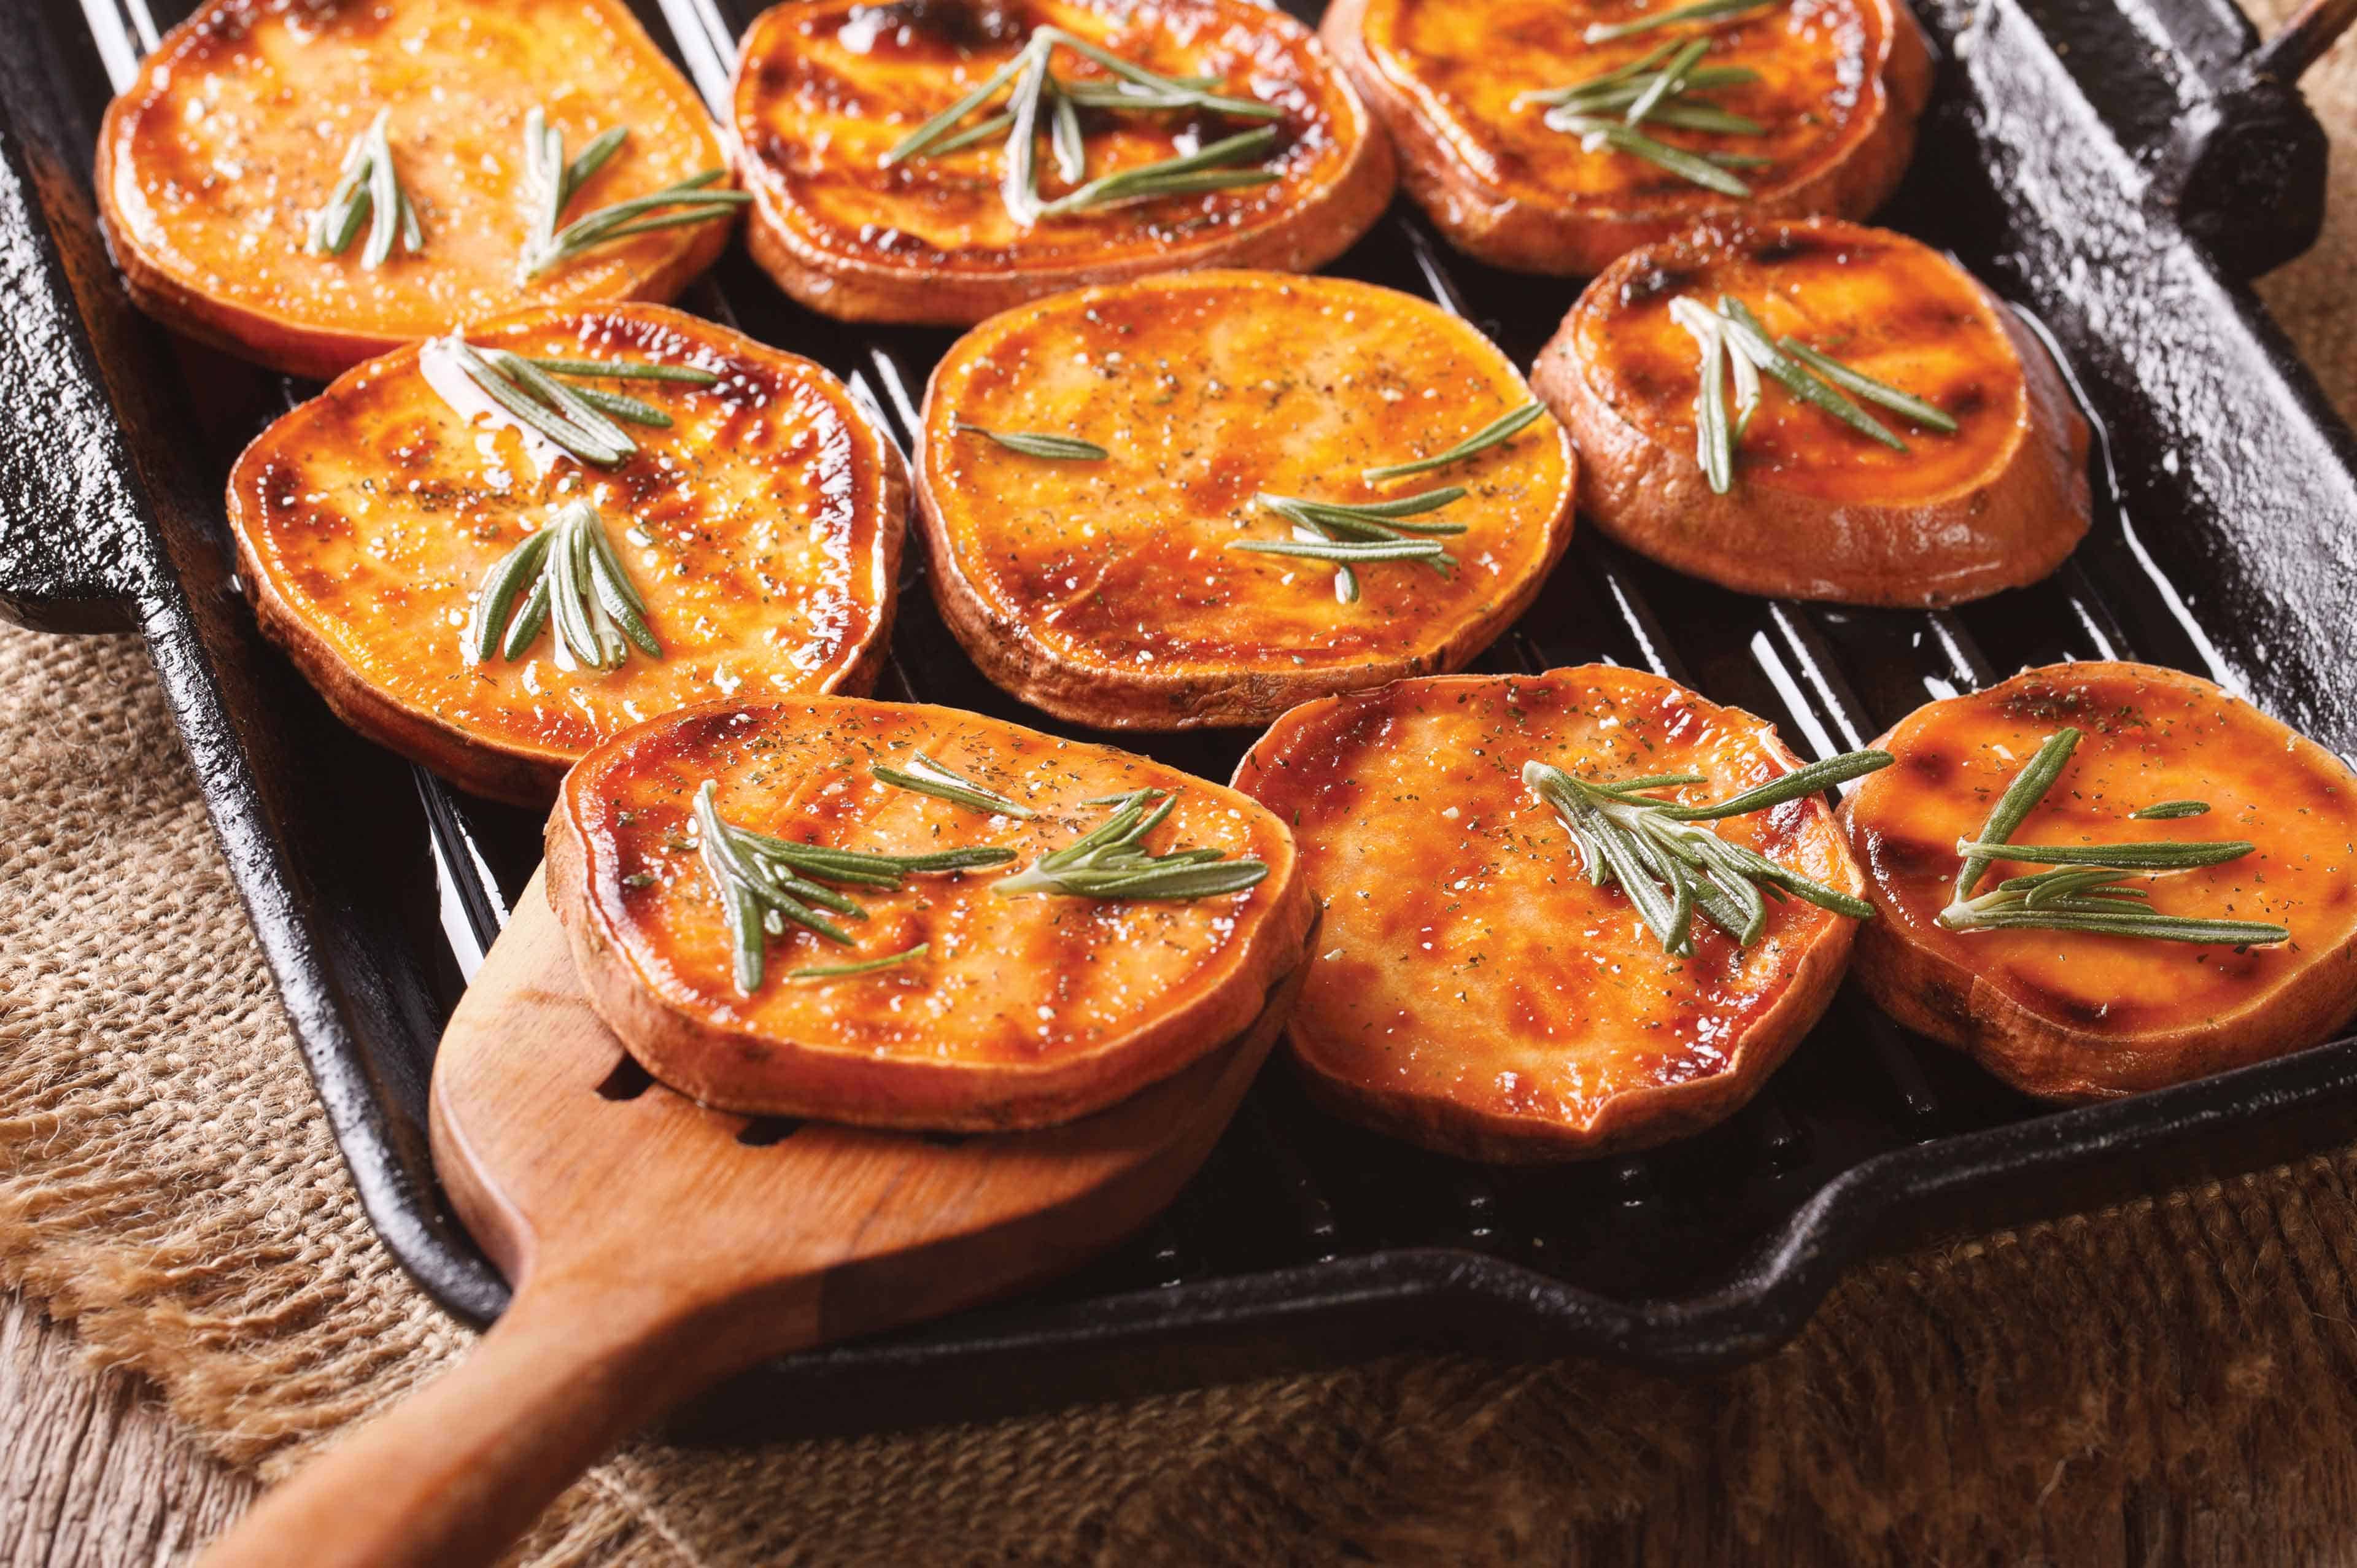 Grilled sweet potato slices with rosemary on a skillet.